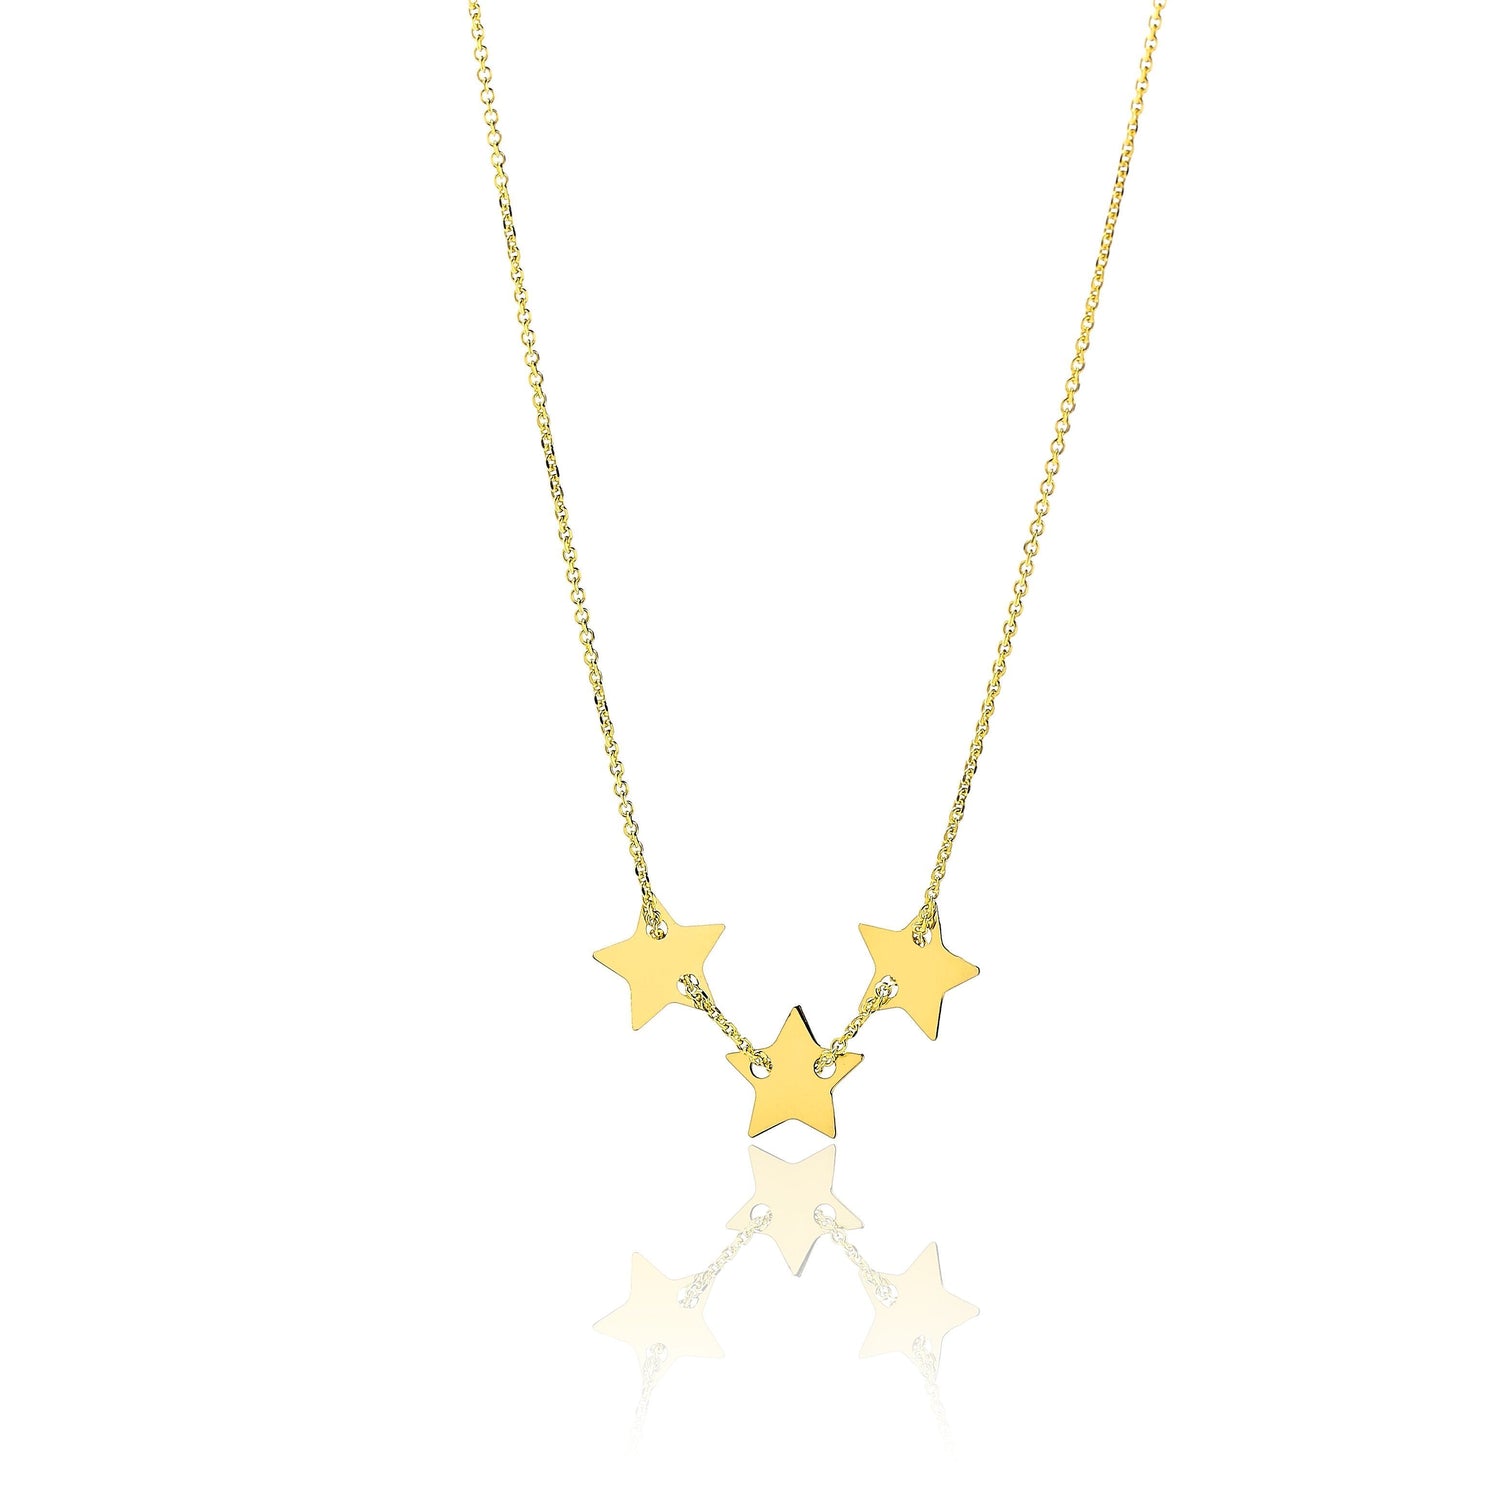 14K Yellow Gold 16 - 18 inch Extendable Fine Three Star Charms Pendant Necklace